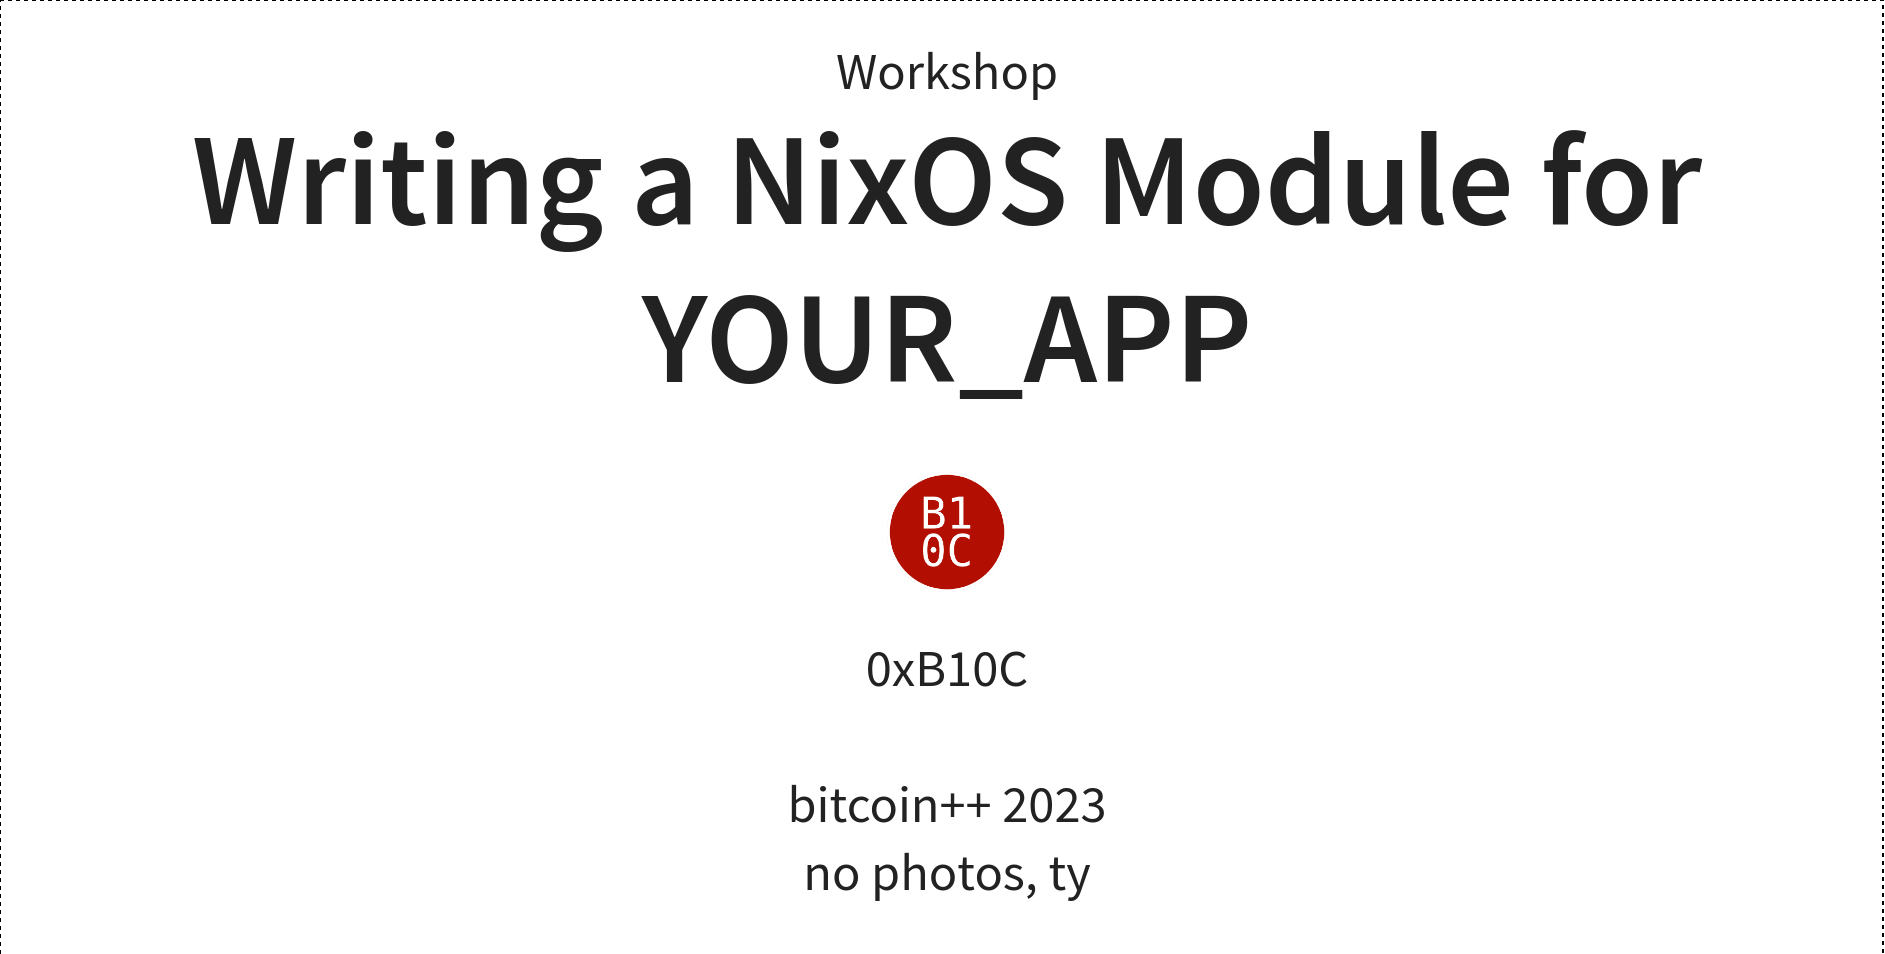 Image for bitcoin++23 Workshop: Writing a NixOS Module for your_app